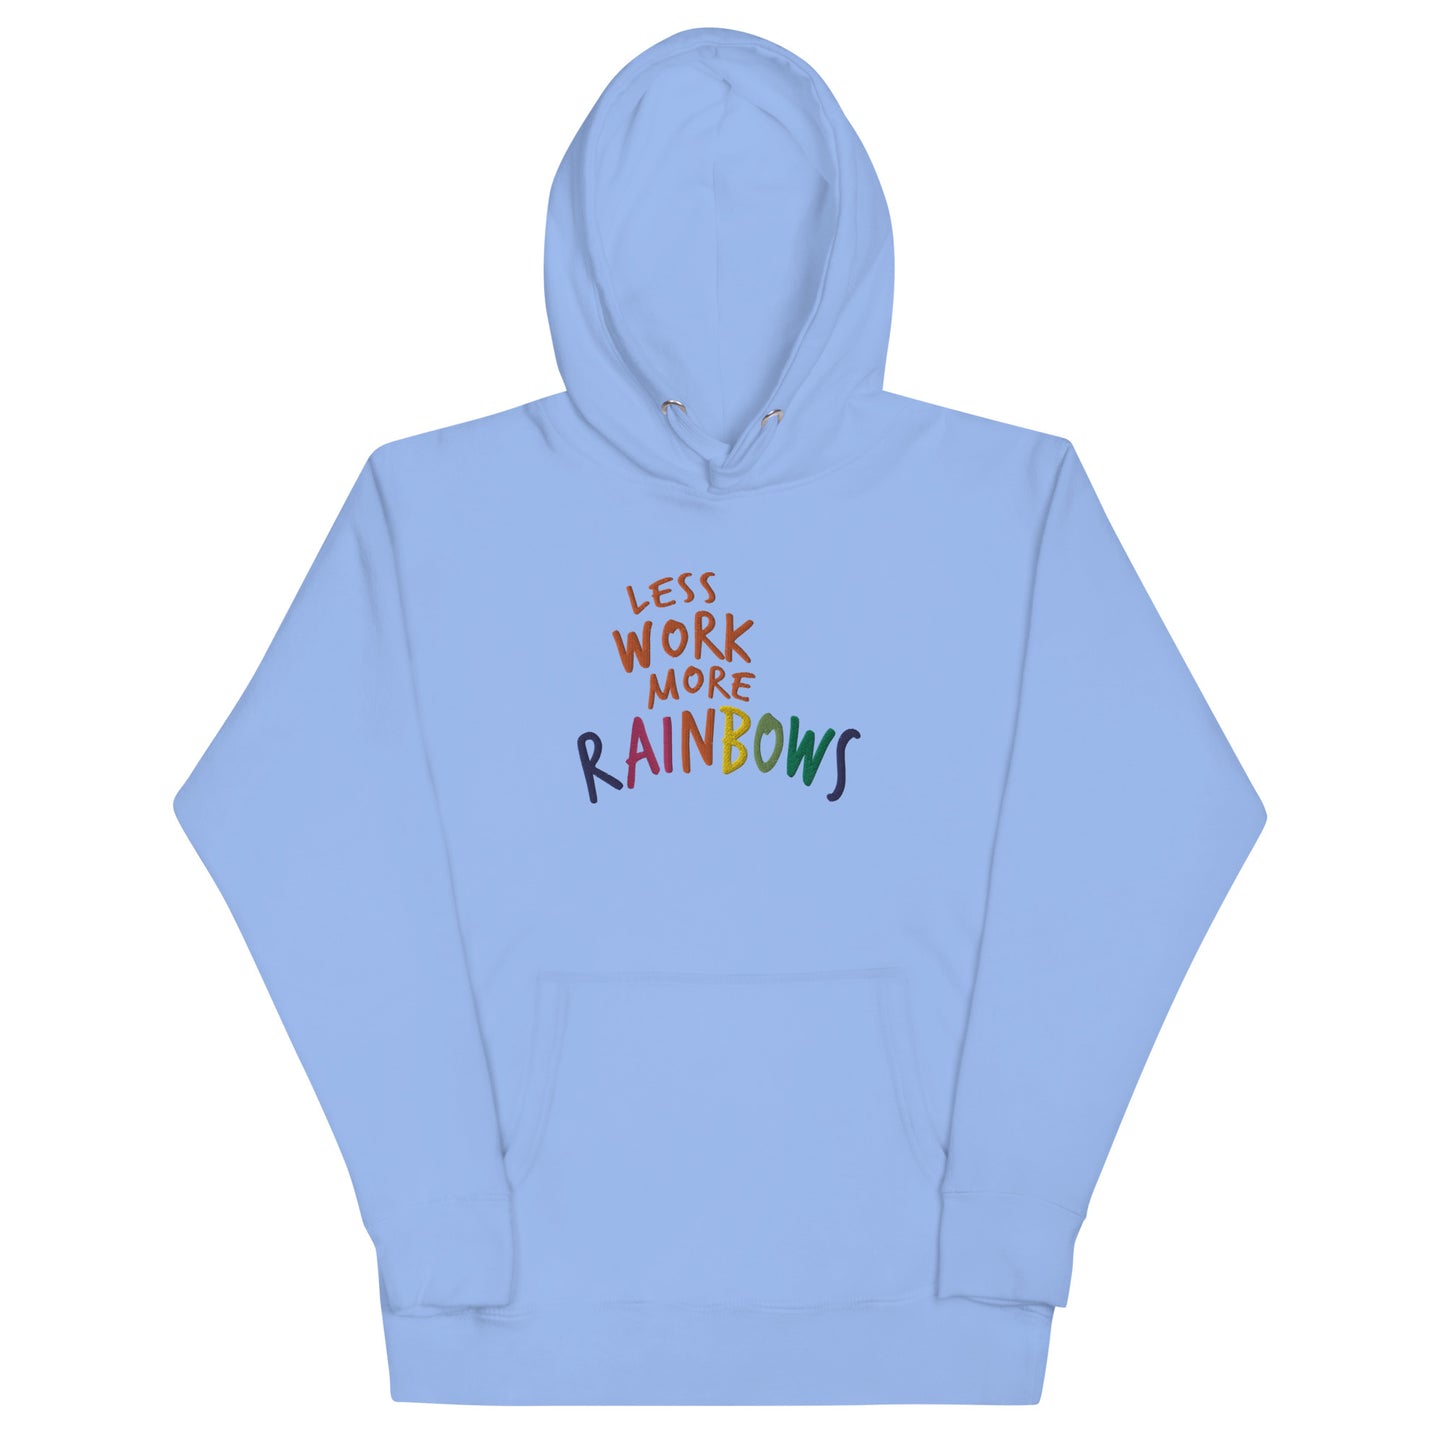 Less Work More Rainbows hoodie is part of the Less Work More Rainbows collection 